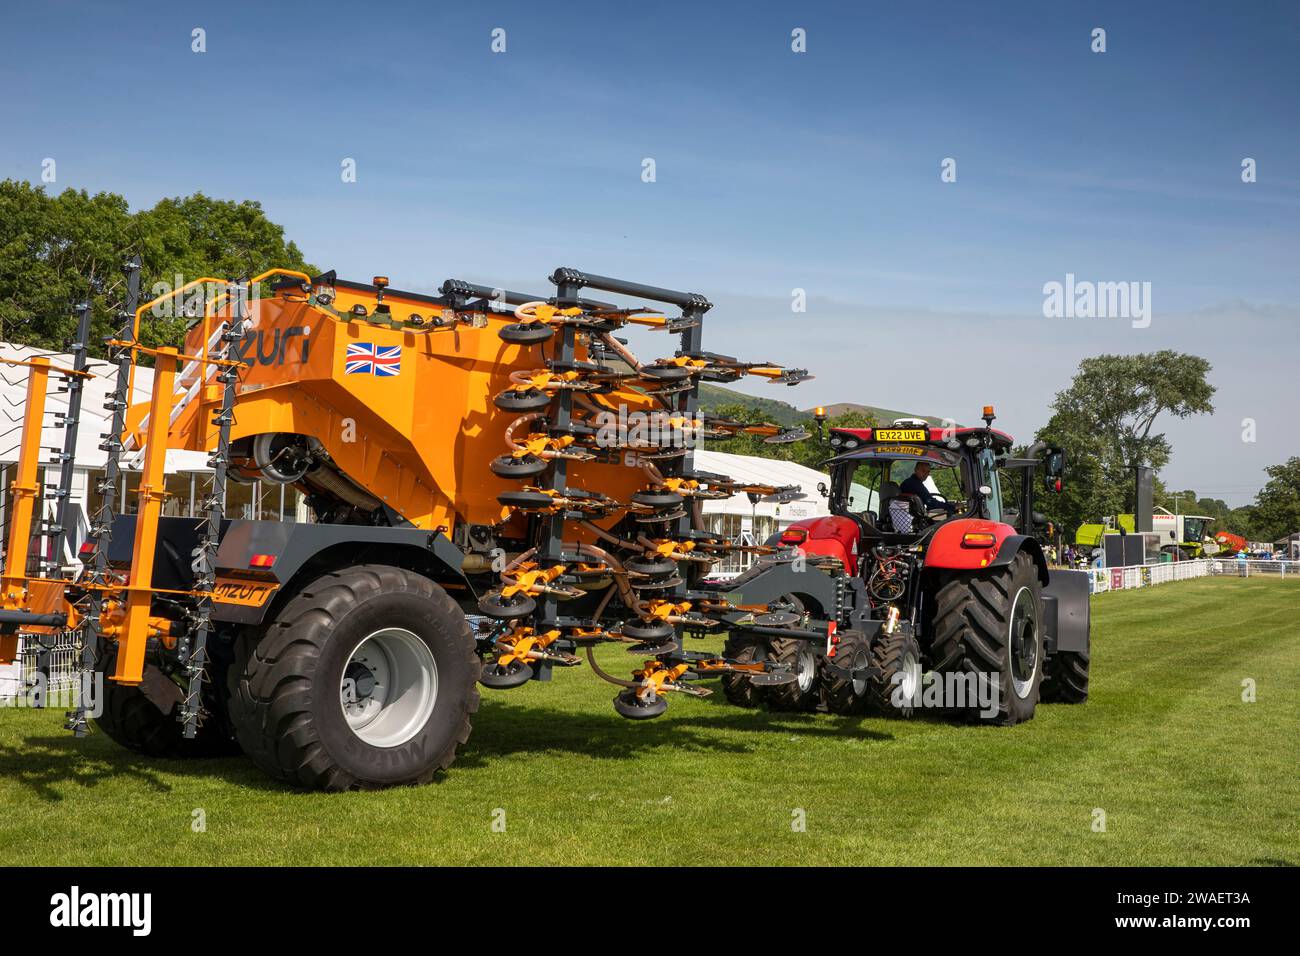 UK, England, Worcestershire, Malvern Wells, Royal 3 Counties Show, Farm Machinery display, tractor with Mzuri iPass Seed Drill for minimum soil distur Stock Photo